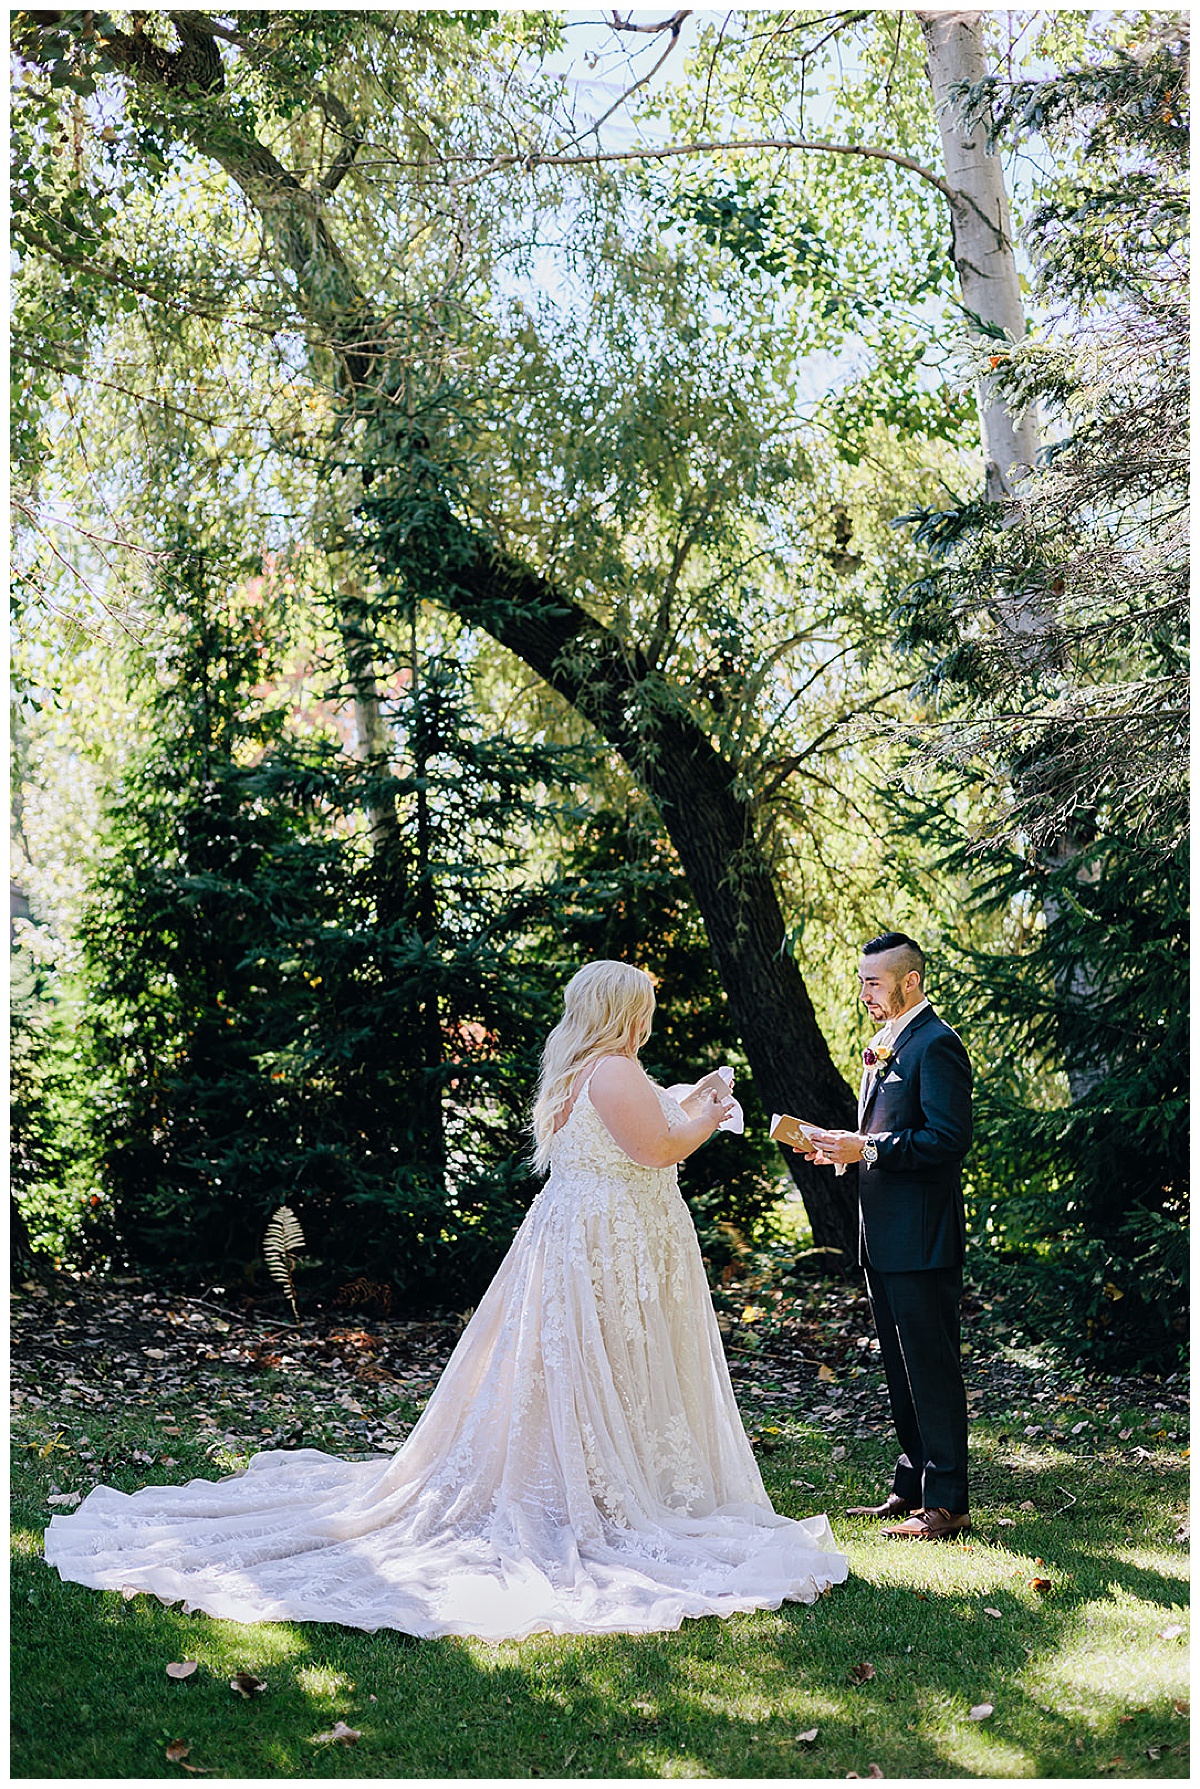 Man and woman stand under tree for Kayla Bouren Photography